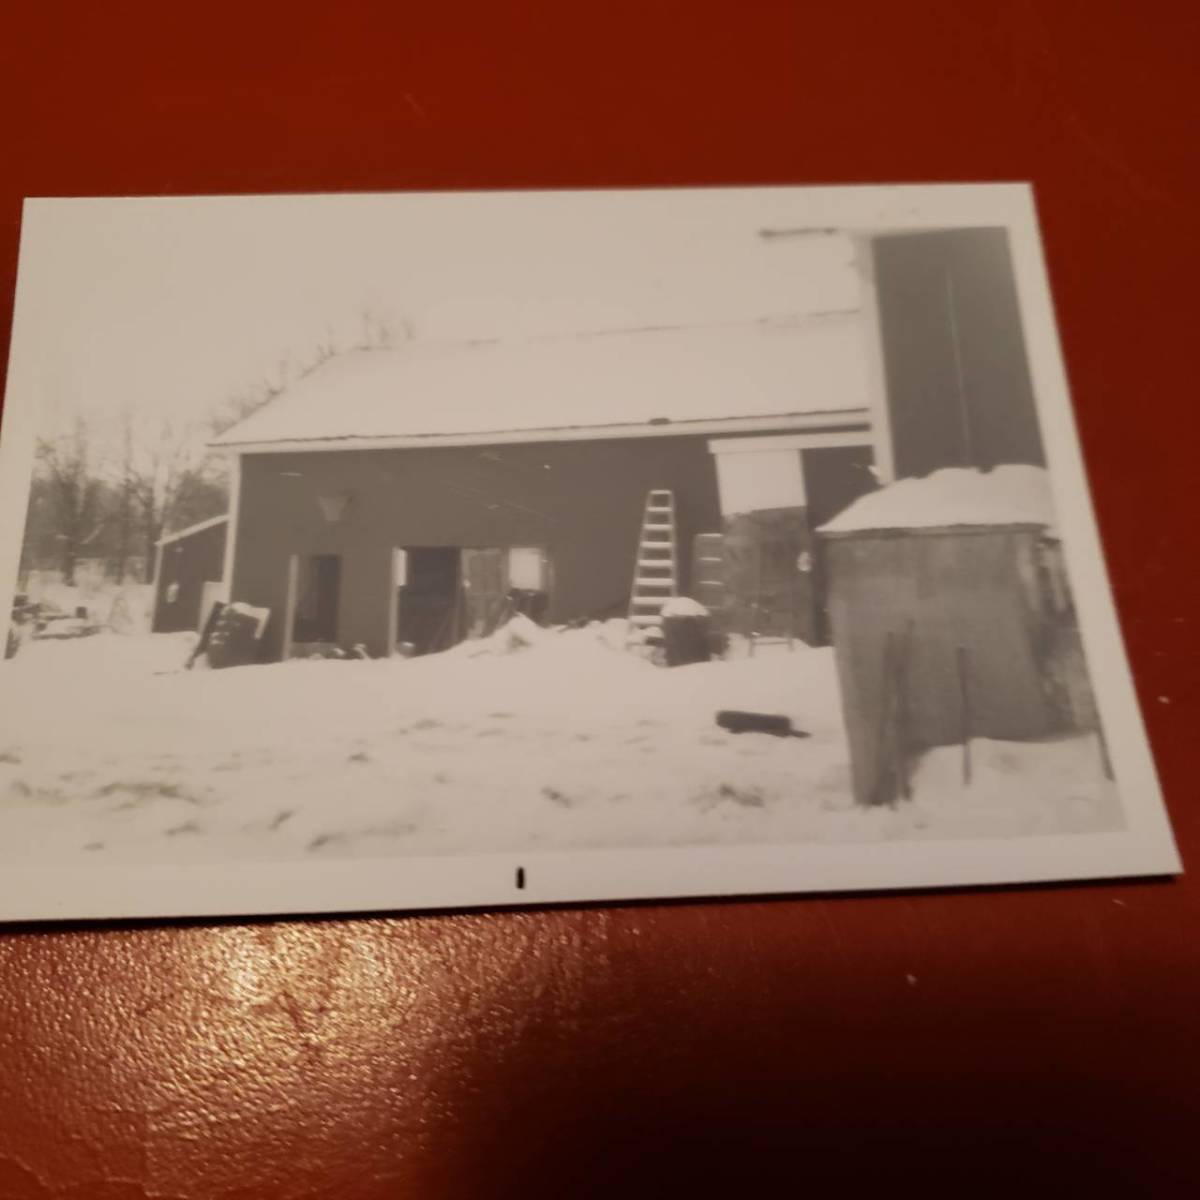 The old horse barn where Christmas presents were hidden in 1960.